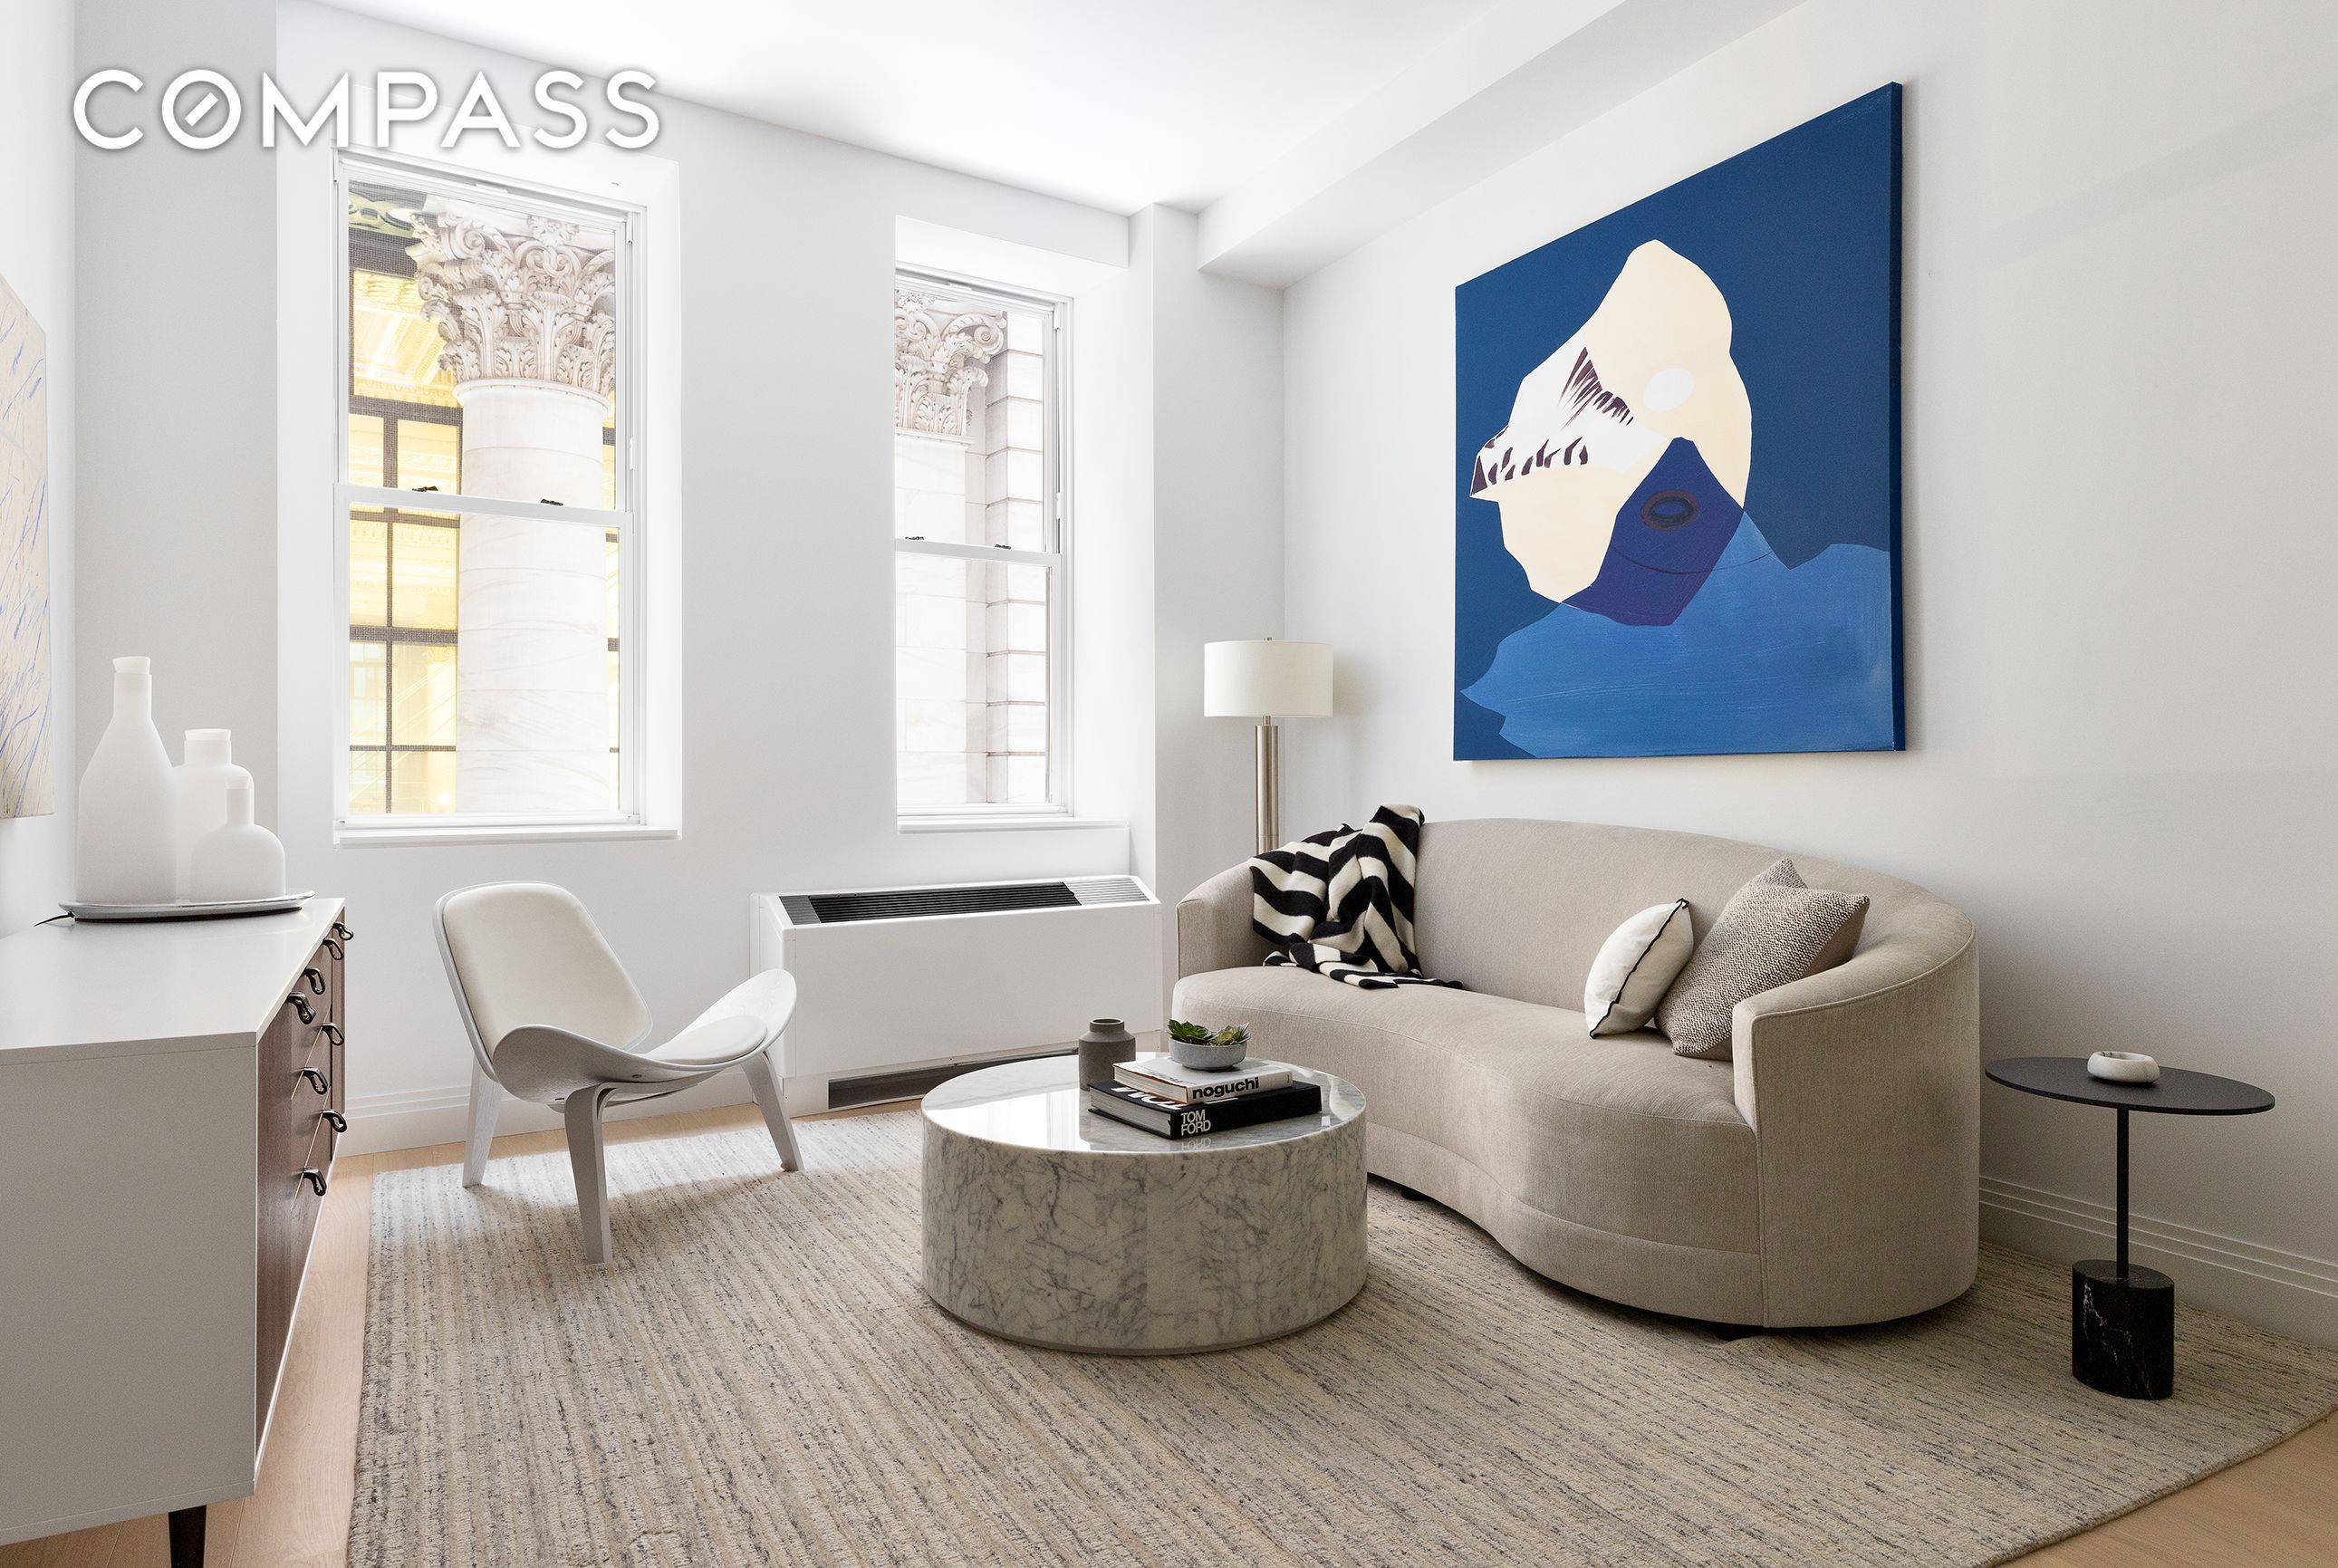 Residence 622 is a sprawling one bedroom home overlooking the New York Stock Exchange.